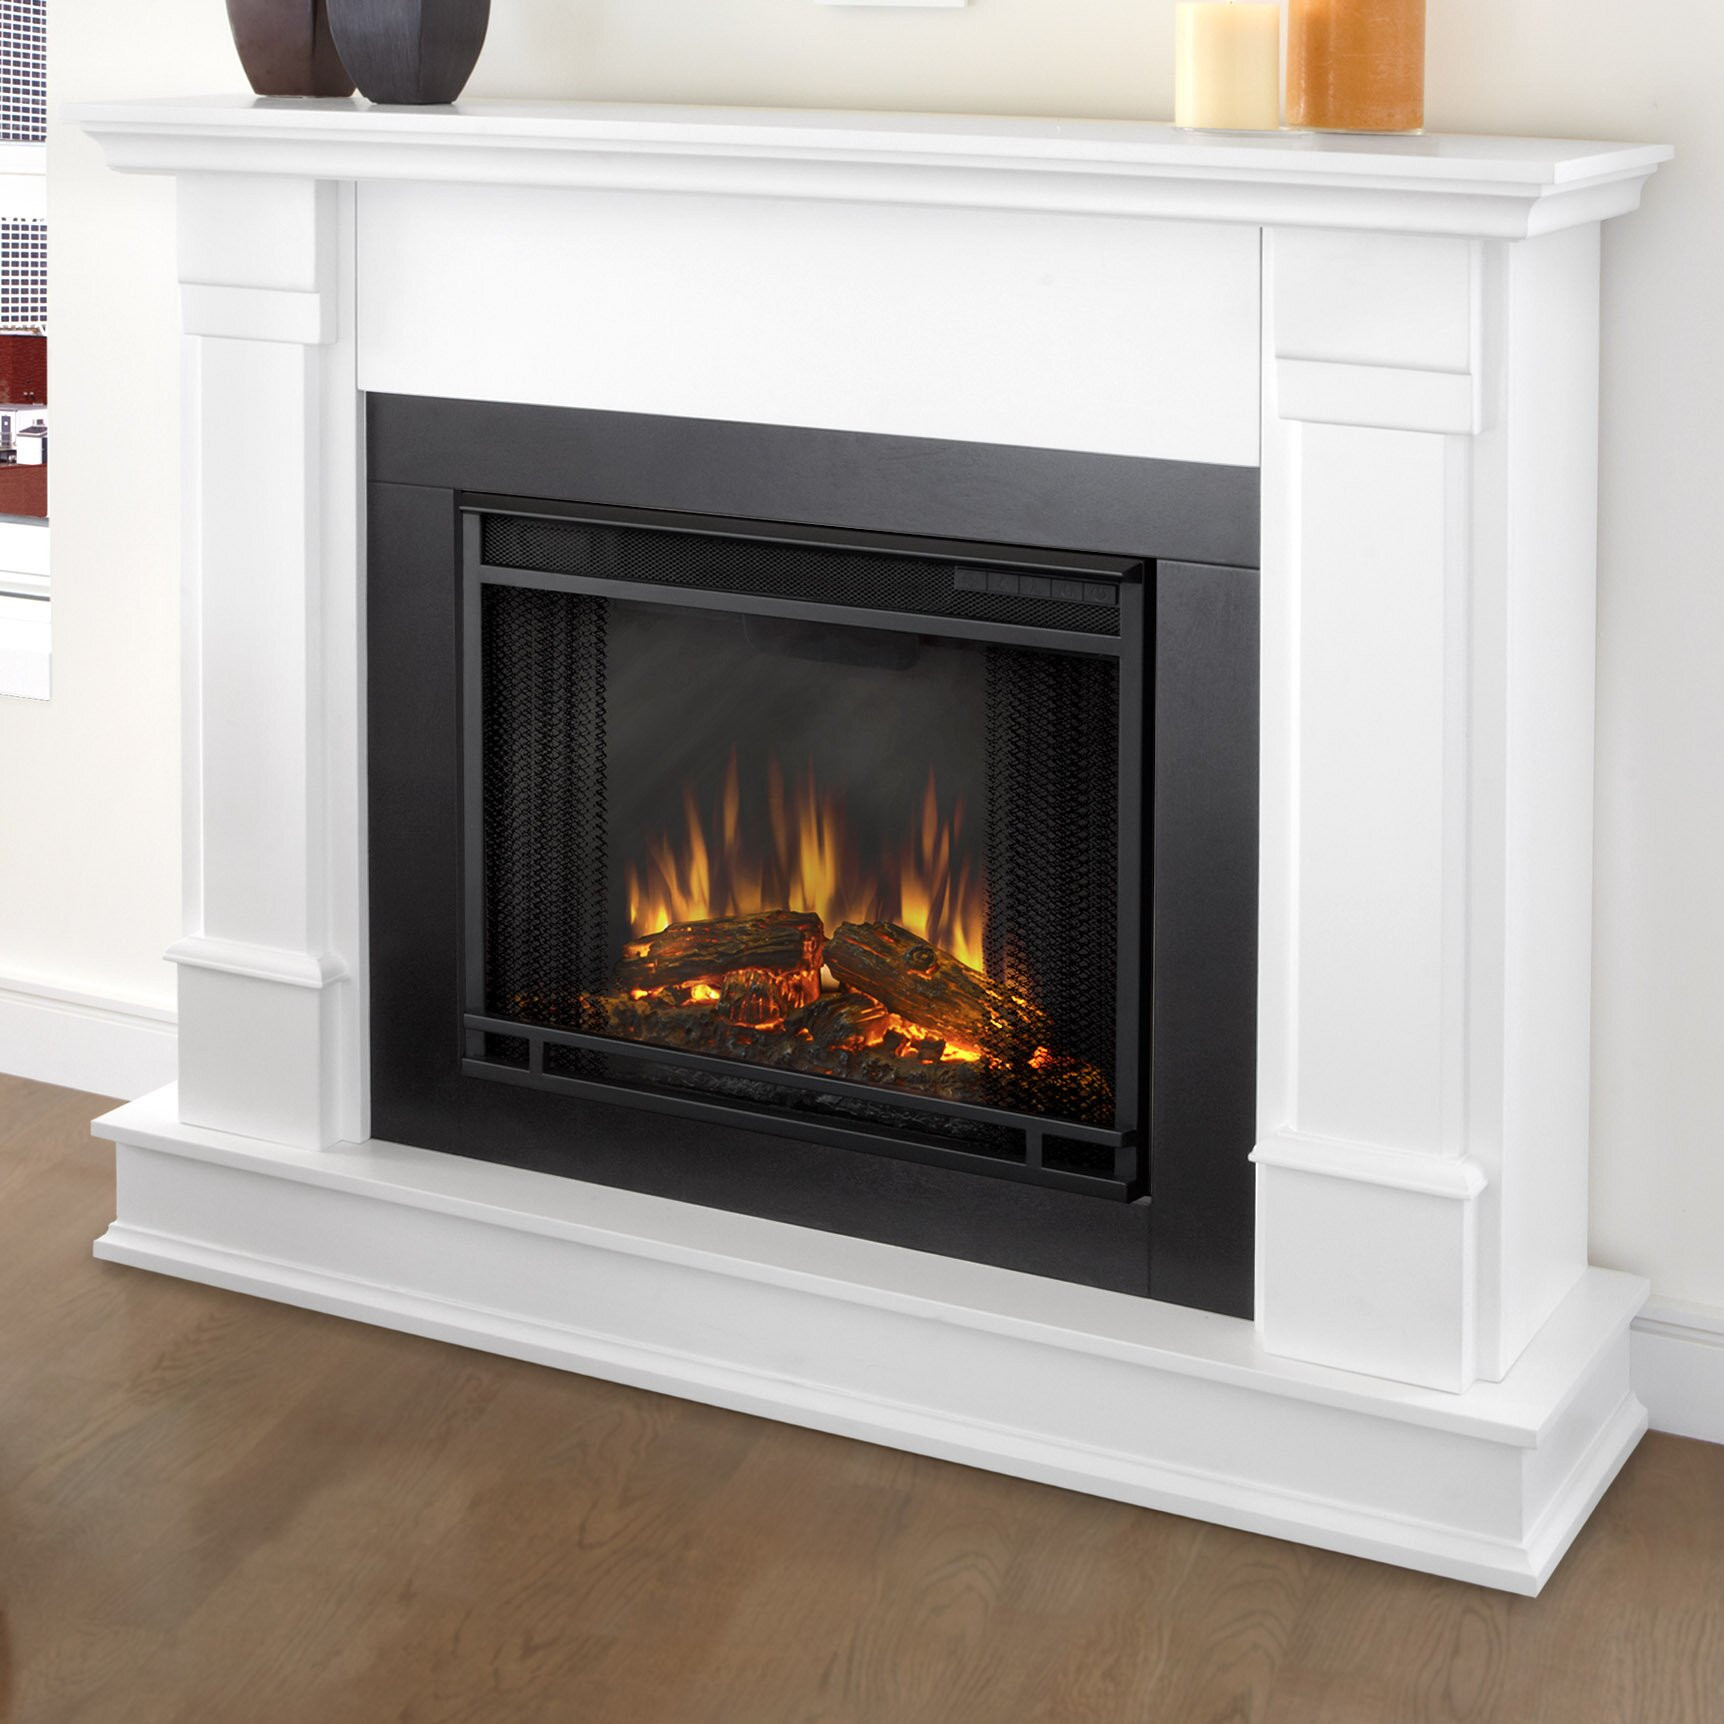 Real Flame Electric Fireplace Reviews
 Real Flame Silverton Electric Fireplace & Reviews